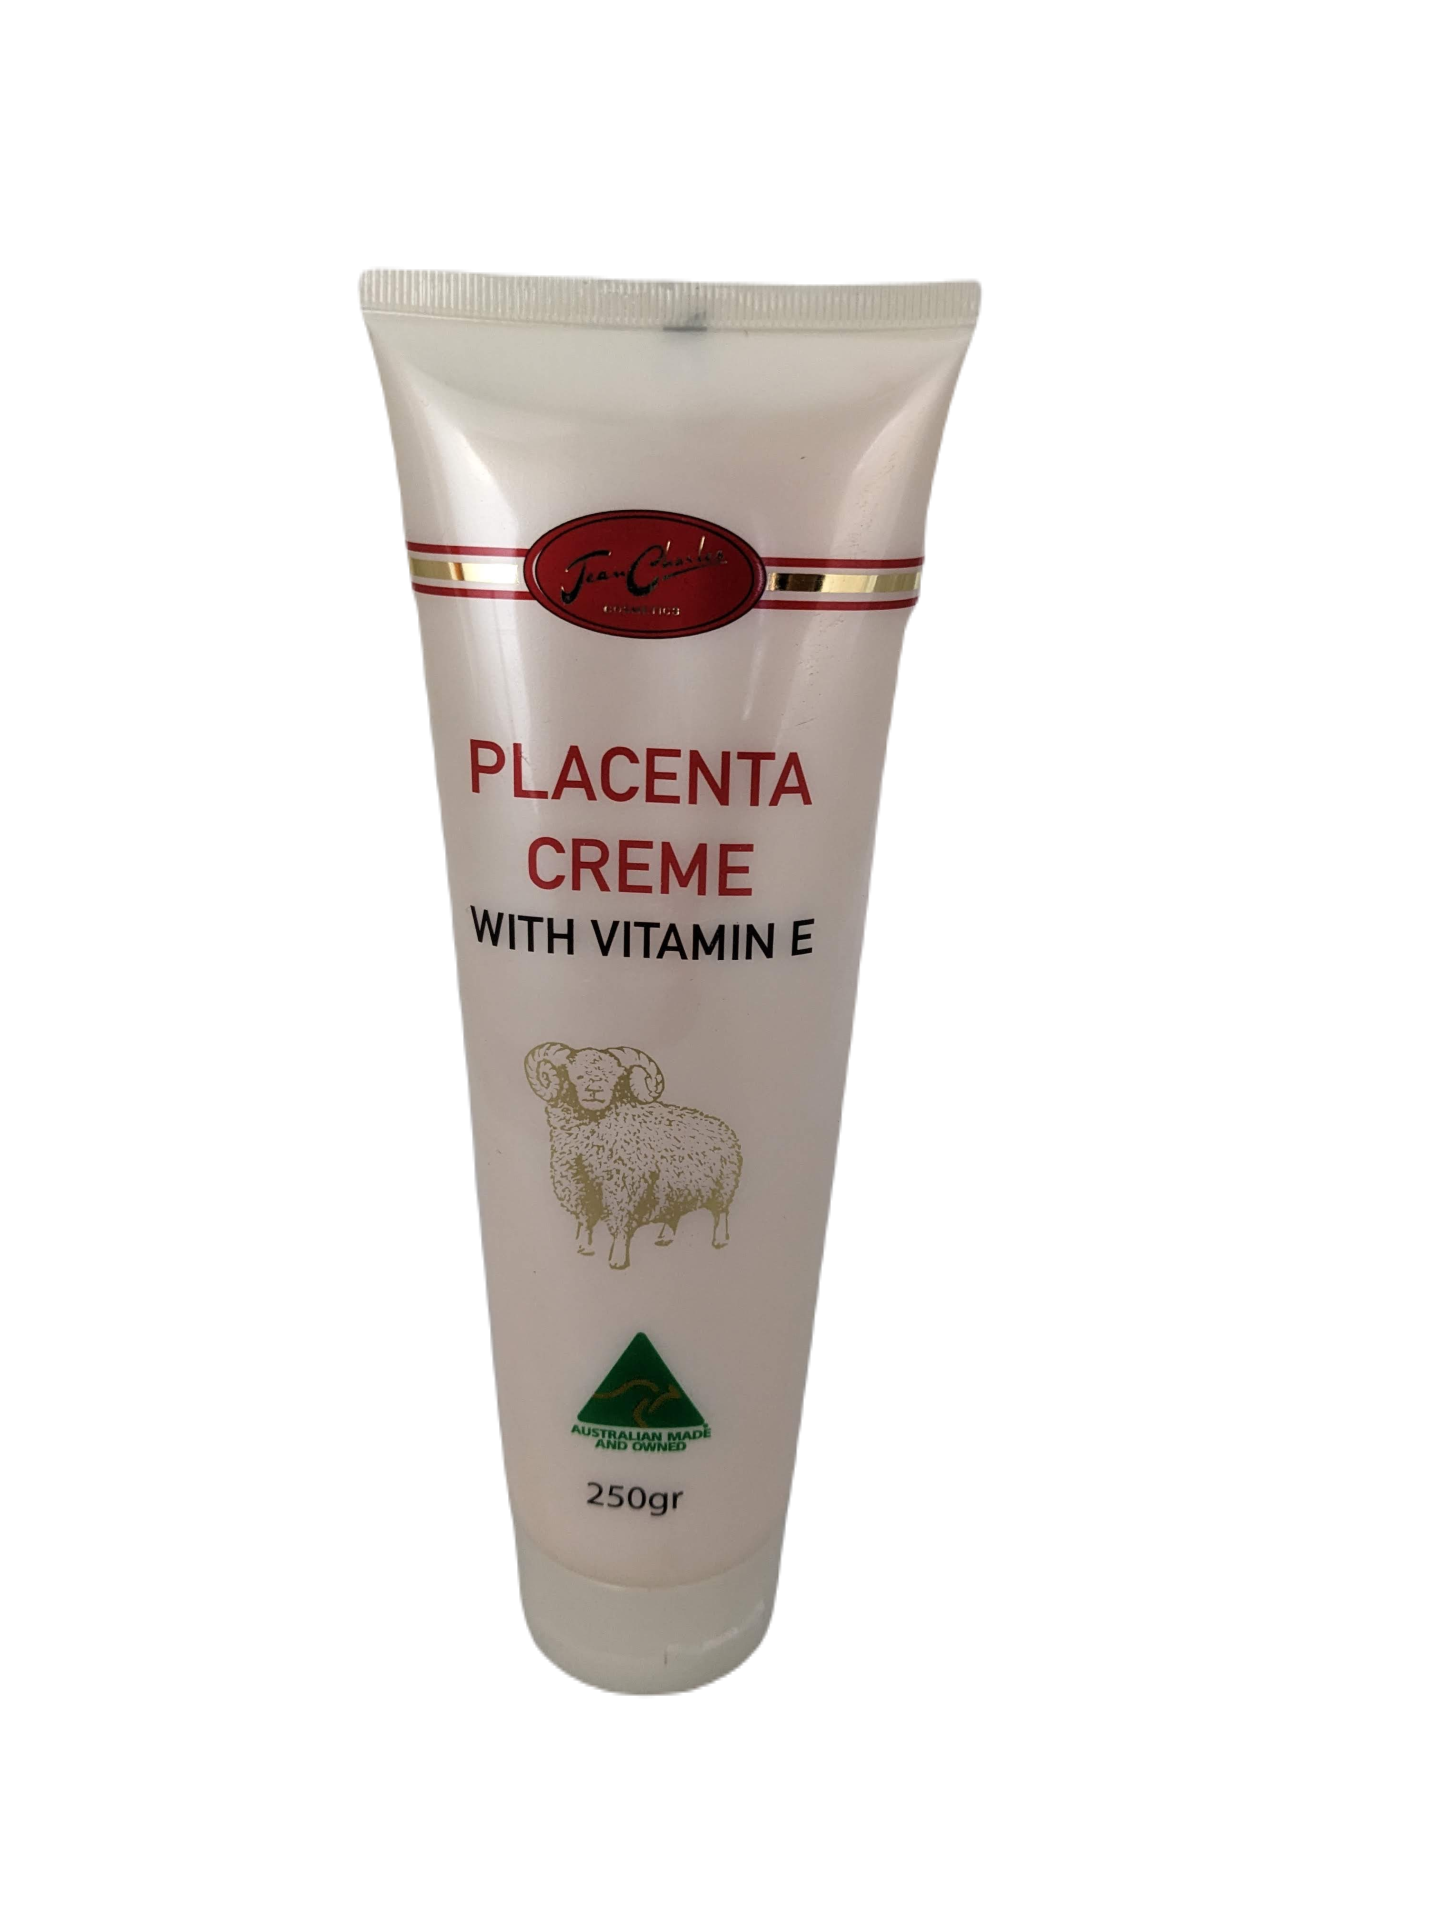 Jean Charles Placenta Creme with Vitamin E - 250g